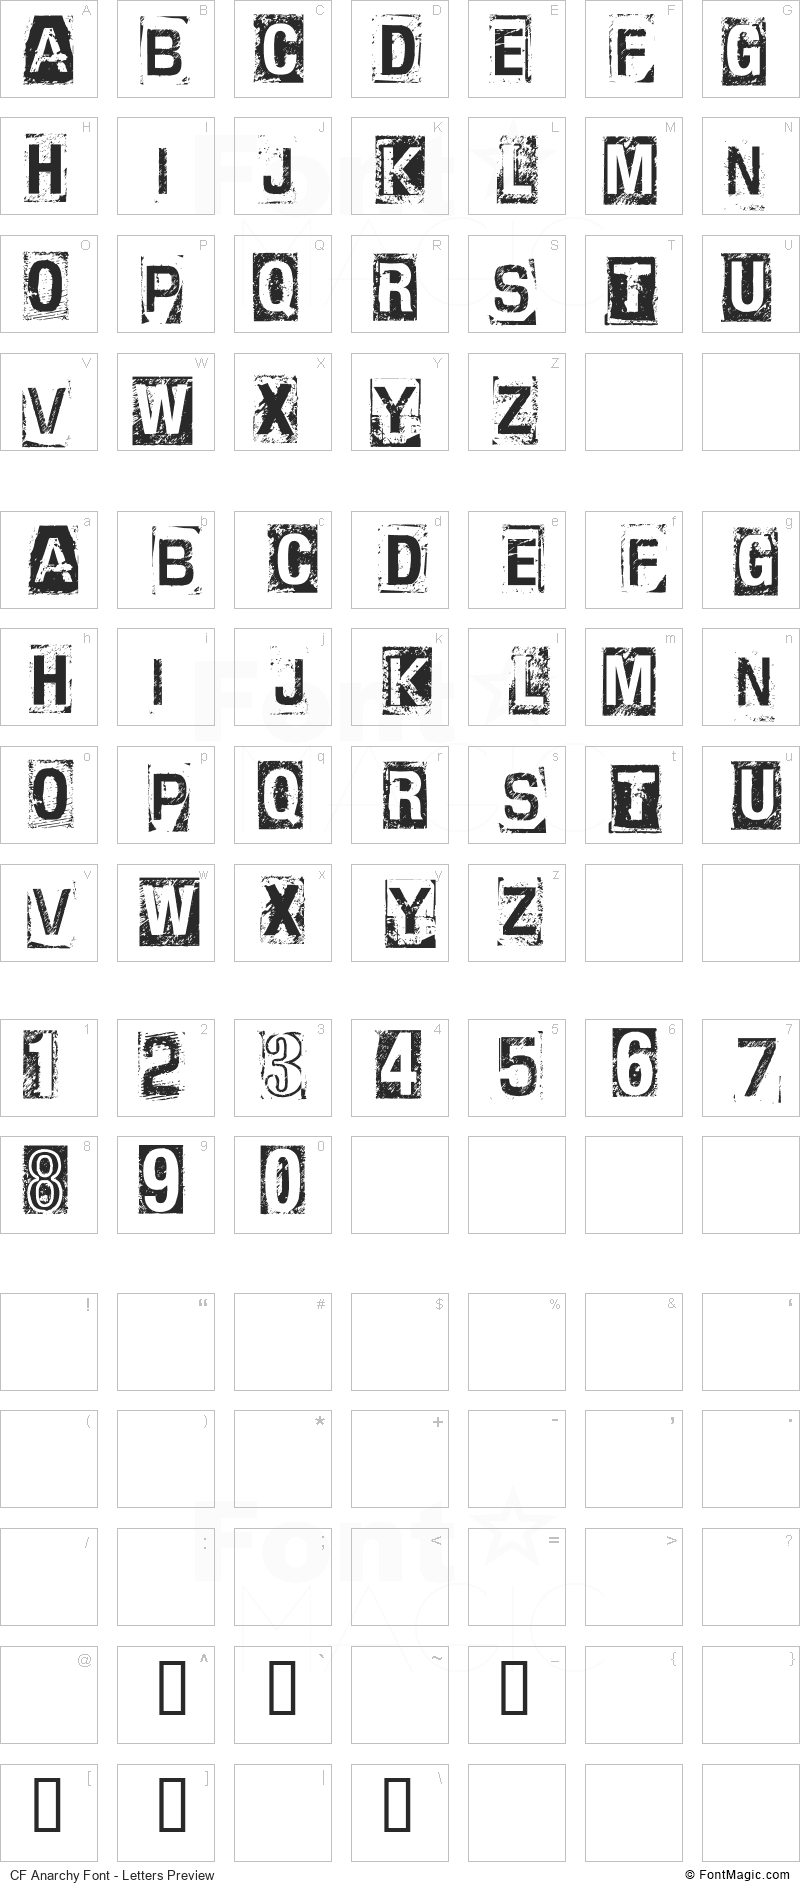 CF Anarchy Font - All Latters Preview Chart